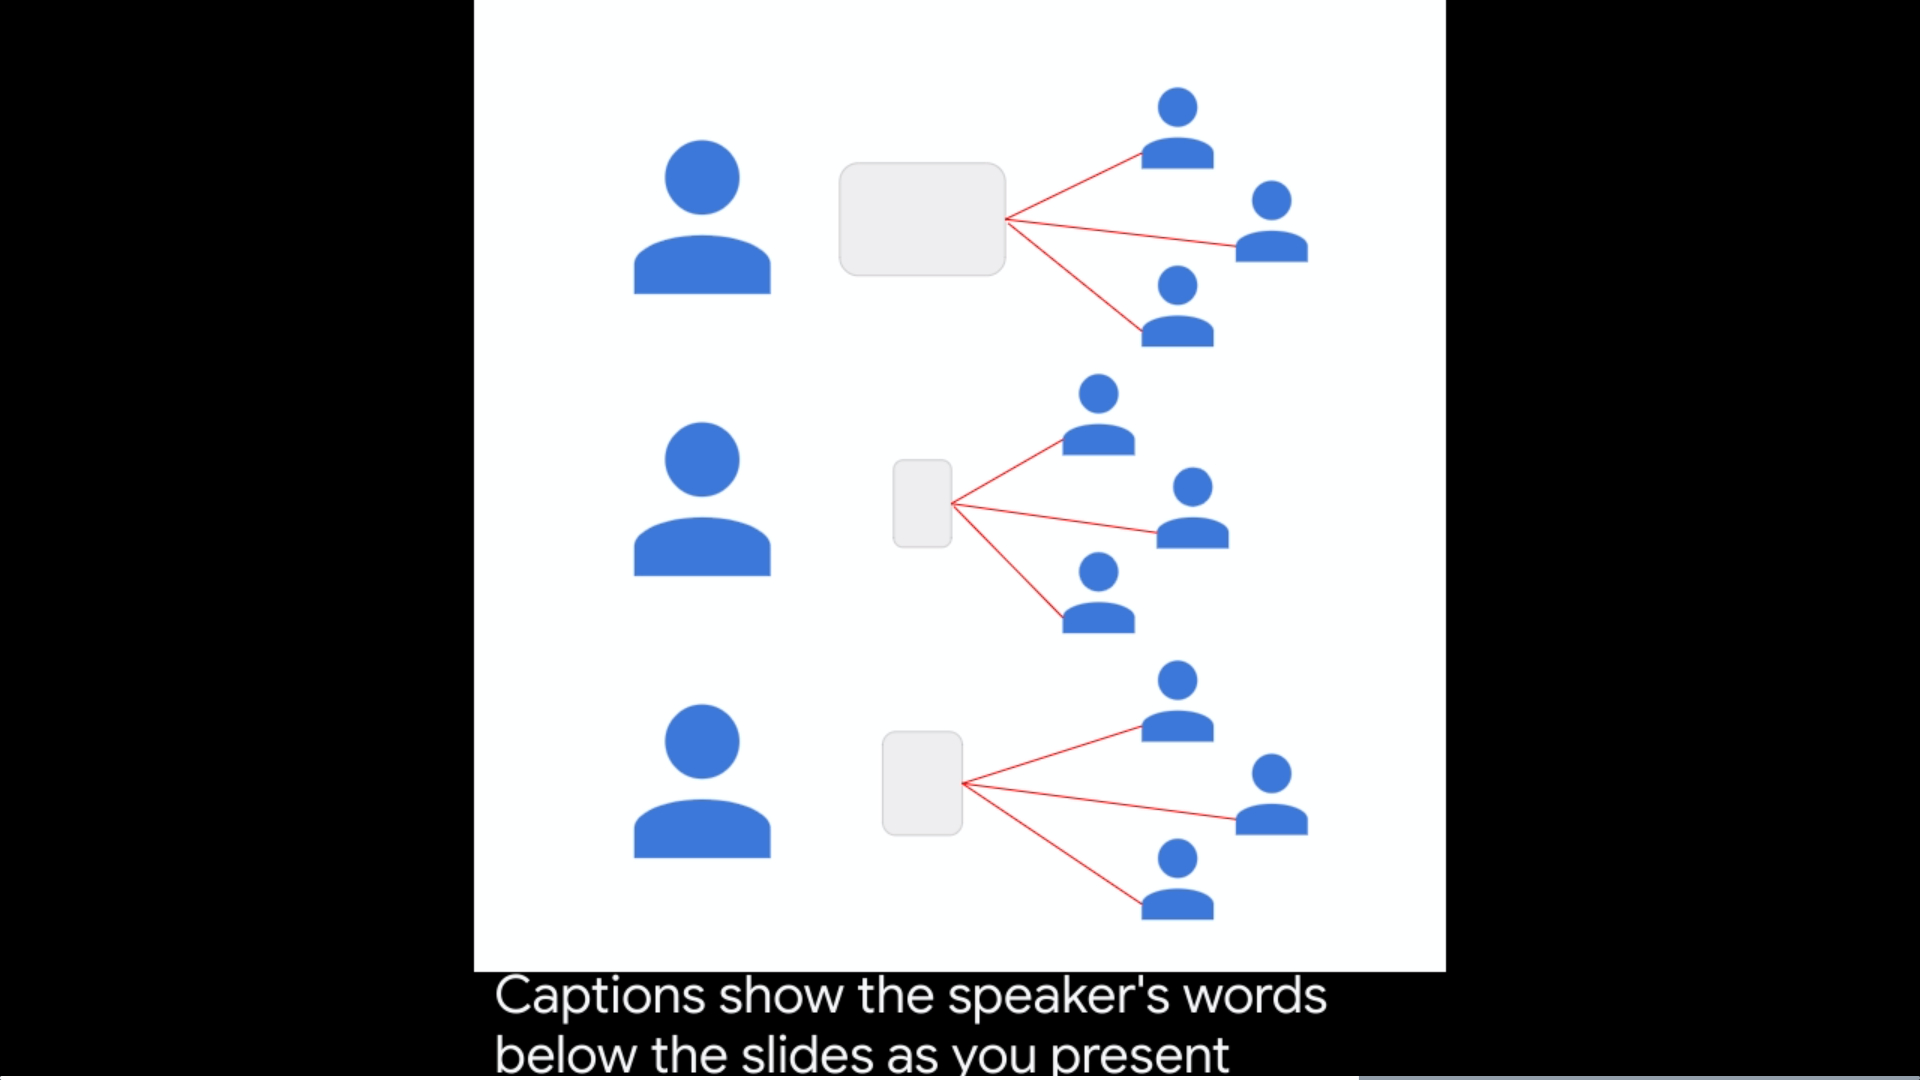 Screenshot of a slide with recognized captions below: "Captions show the speaker's words below as you present"